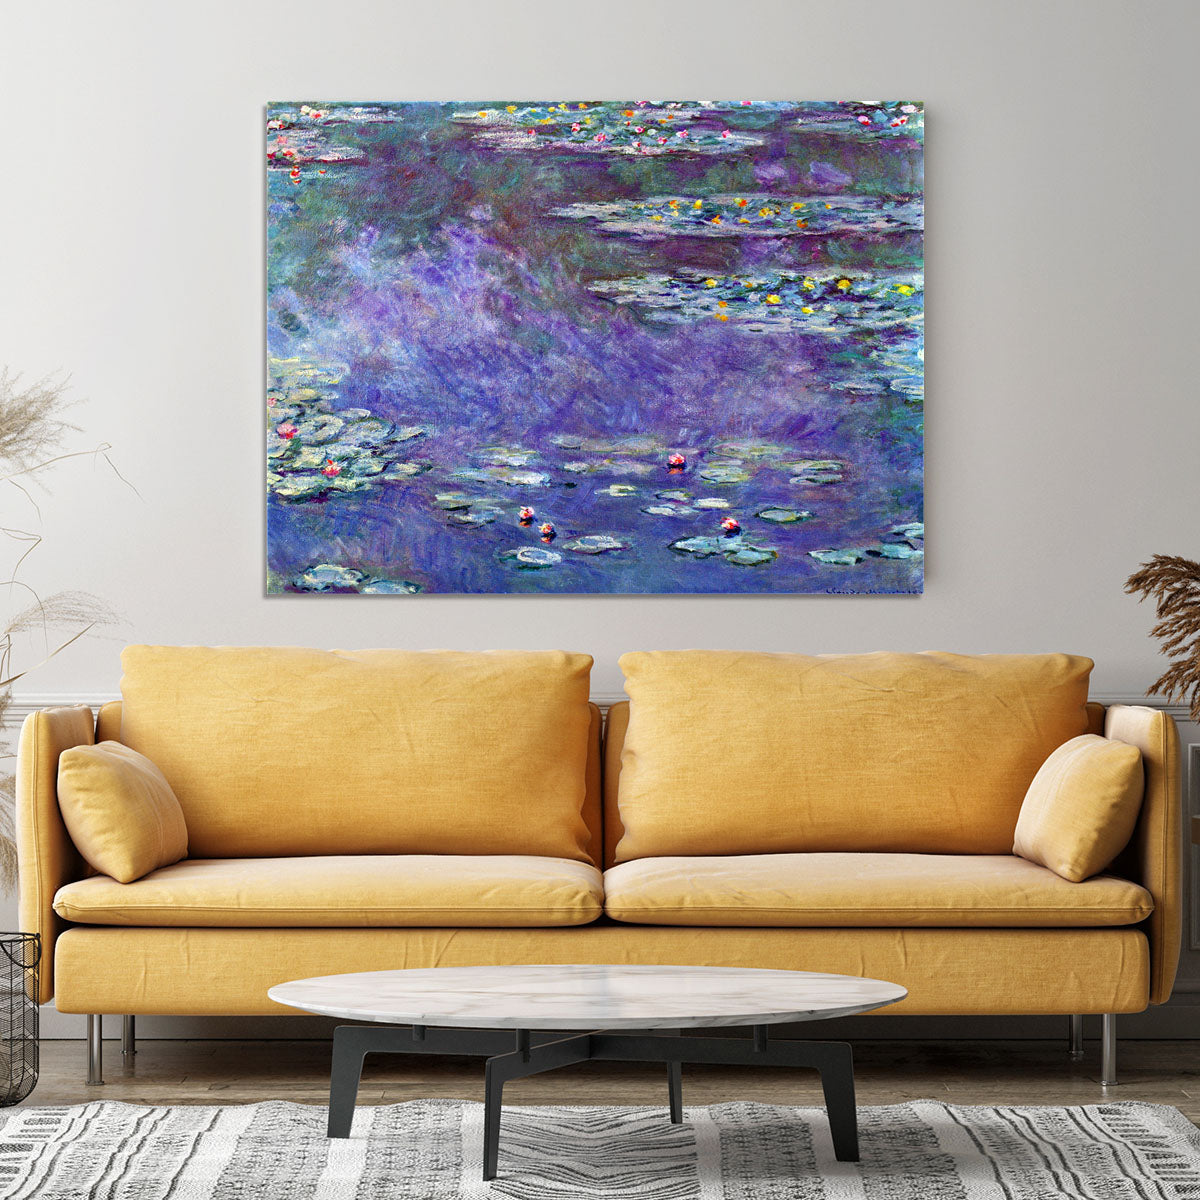 Water Lily Pond 3 by Monet Canvas Print or Poster - Canvas Art Rocks - 4